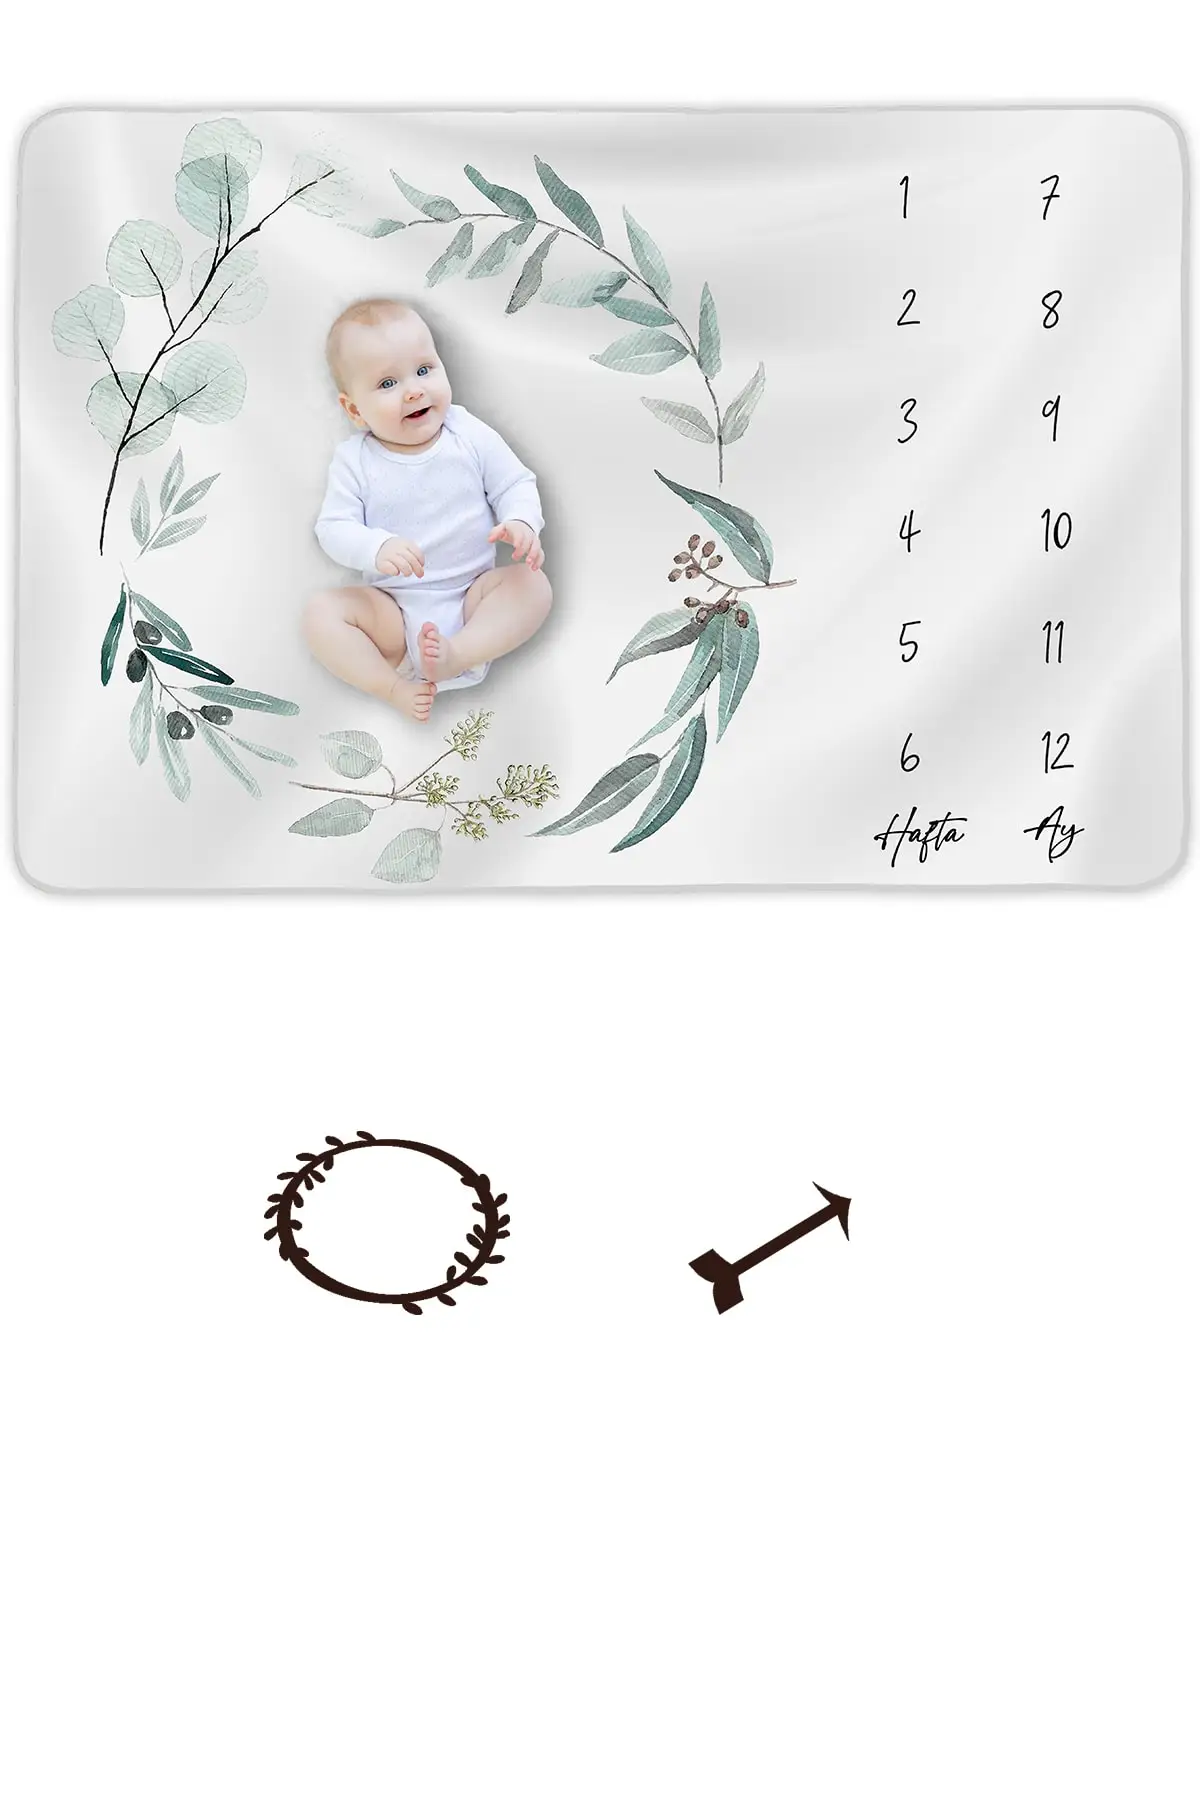 Baby Moment Blanket, Newborn Months Old Concept Photo Shooting Blanket 150x100cm, Gift Polyester Green